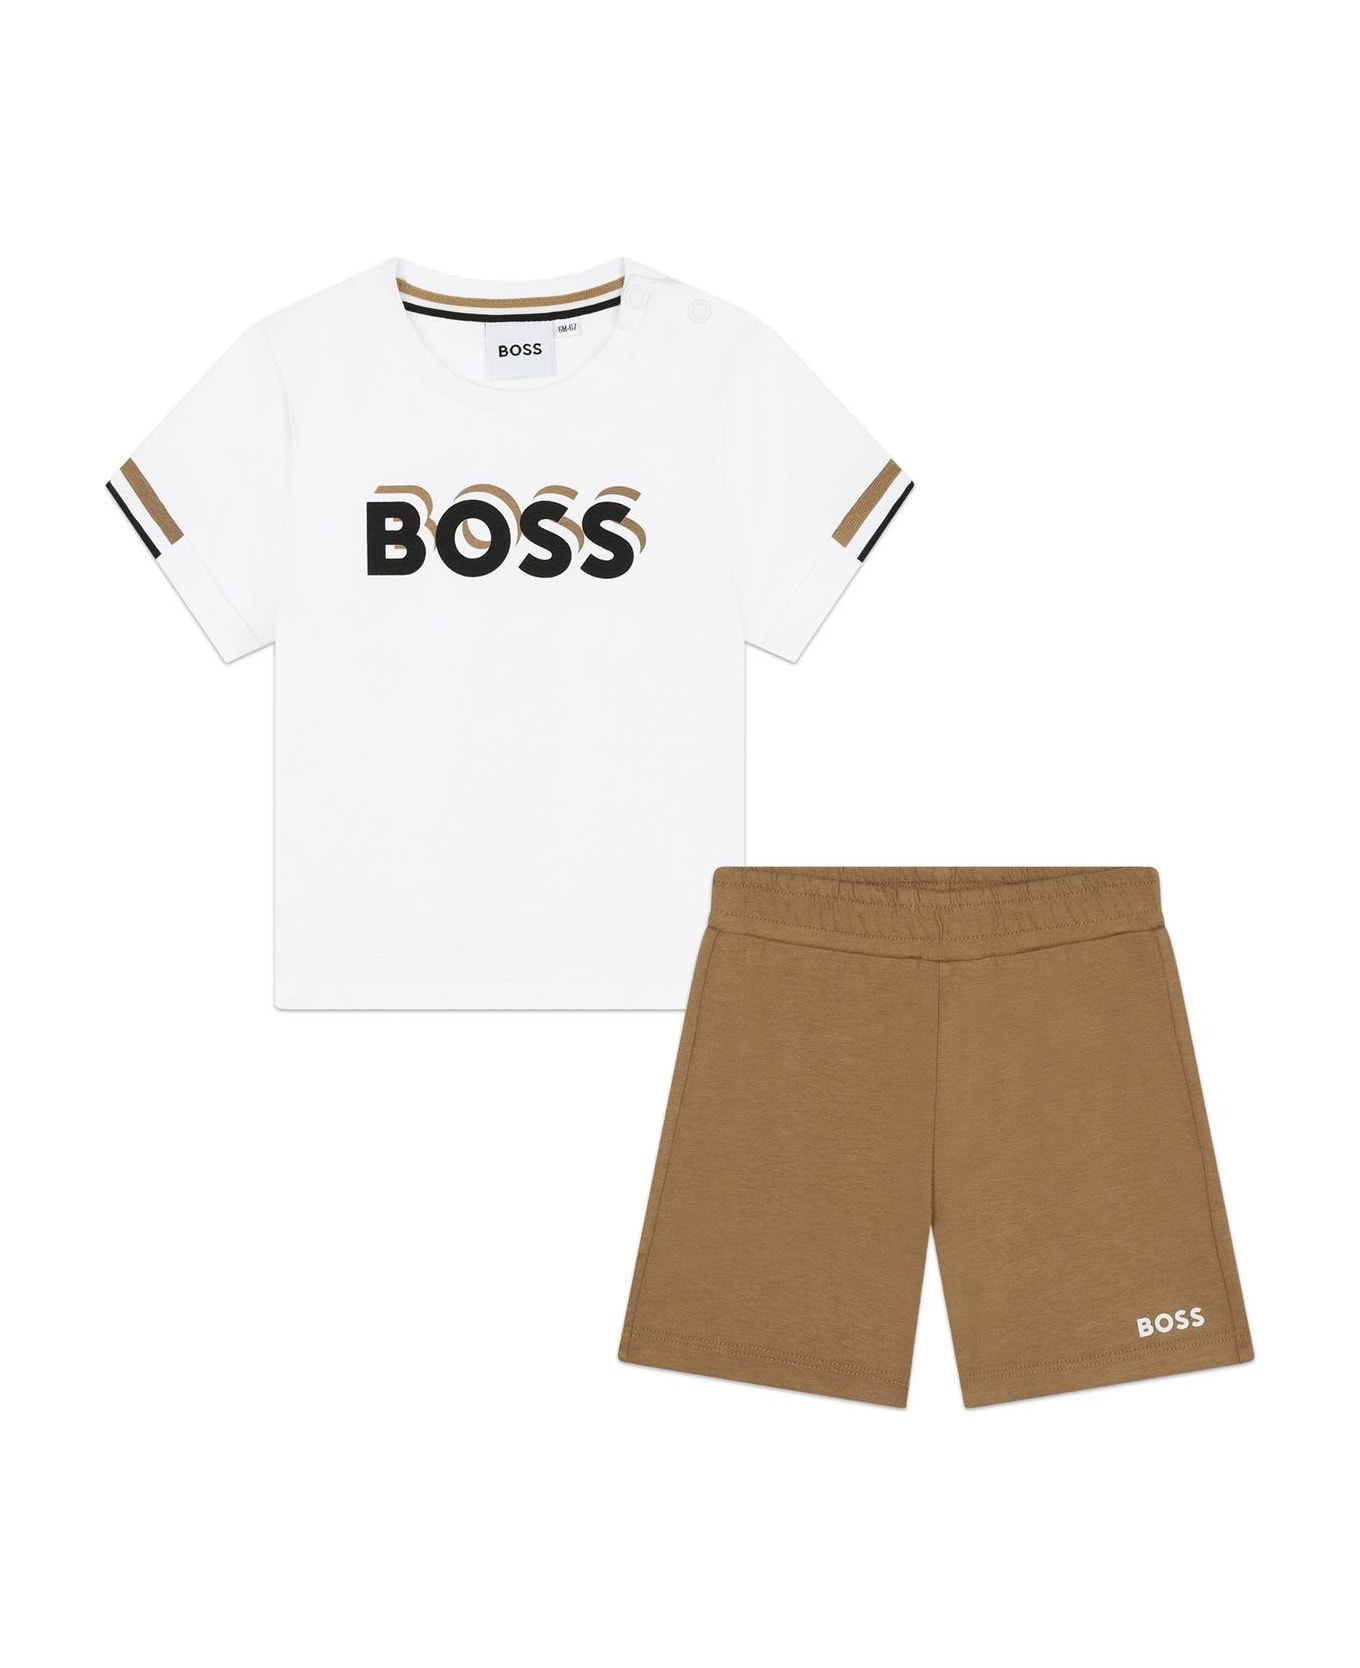 Hugo Boss Printed Top And Shorts Set - Beige ボディスーツ＆セットアップ